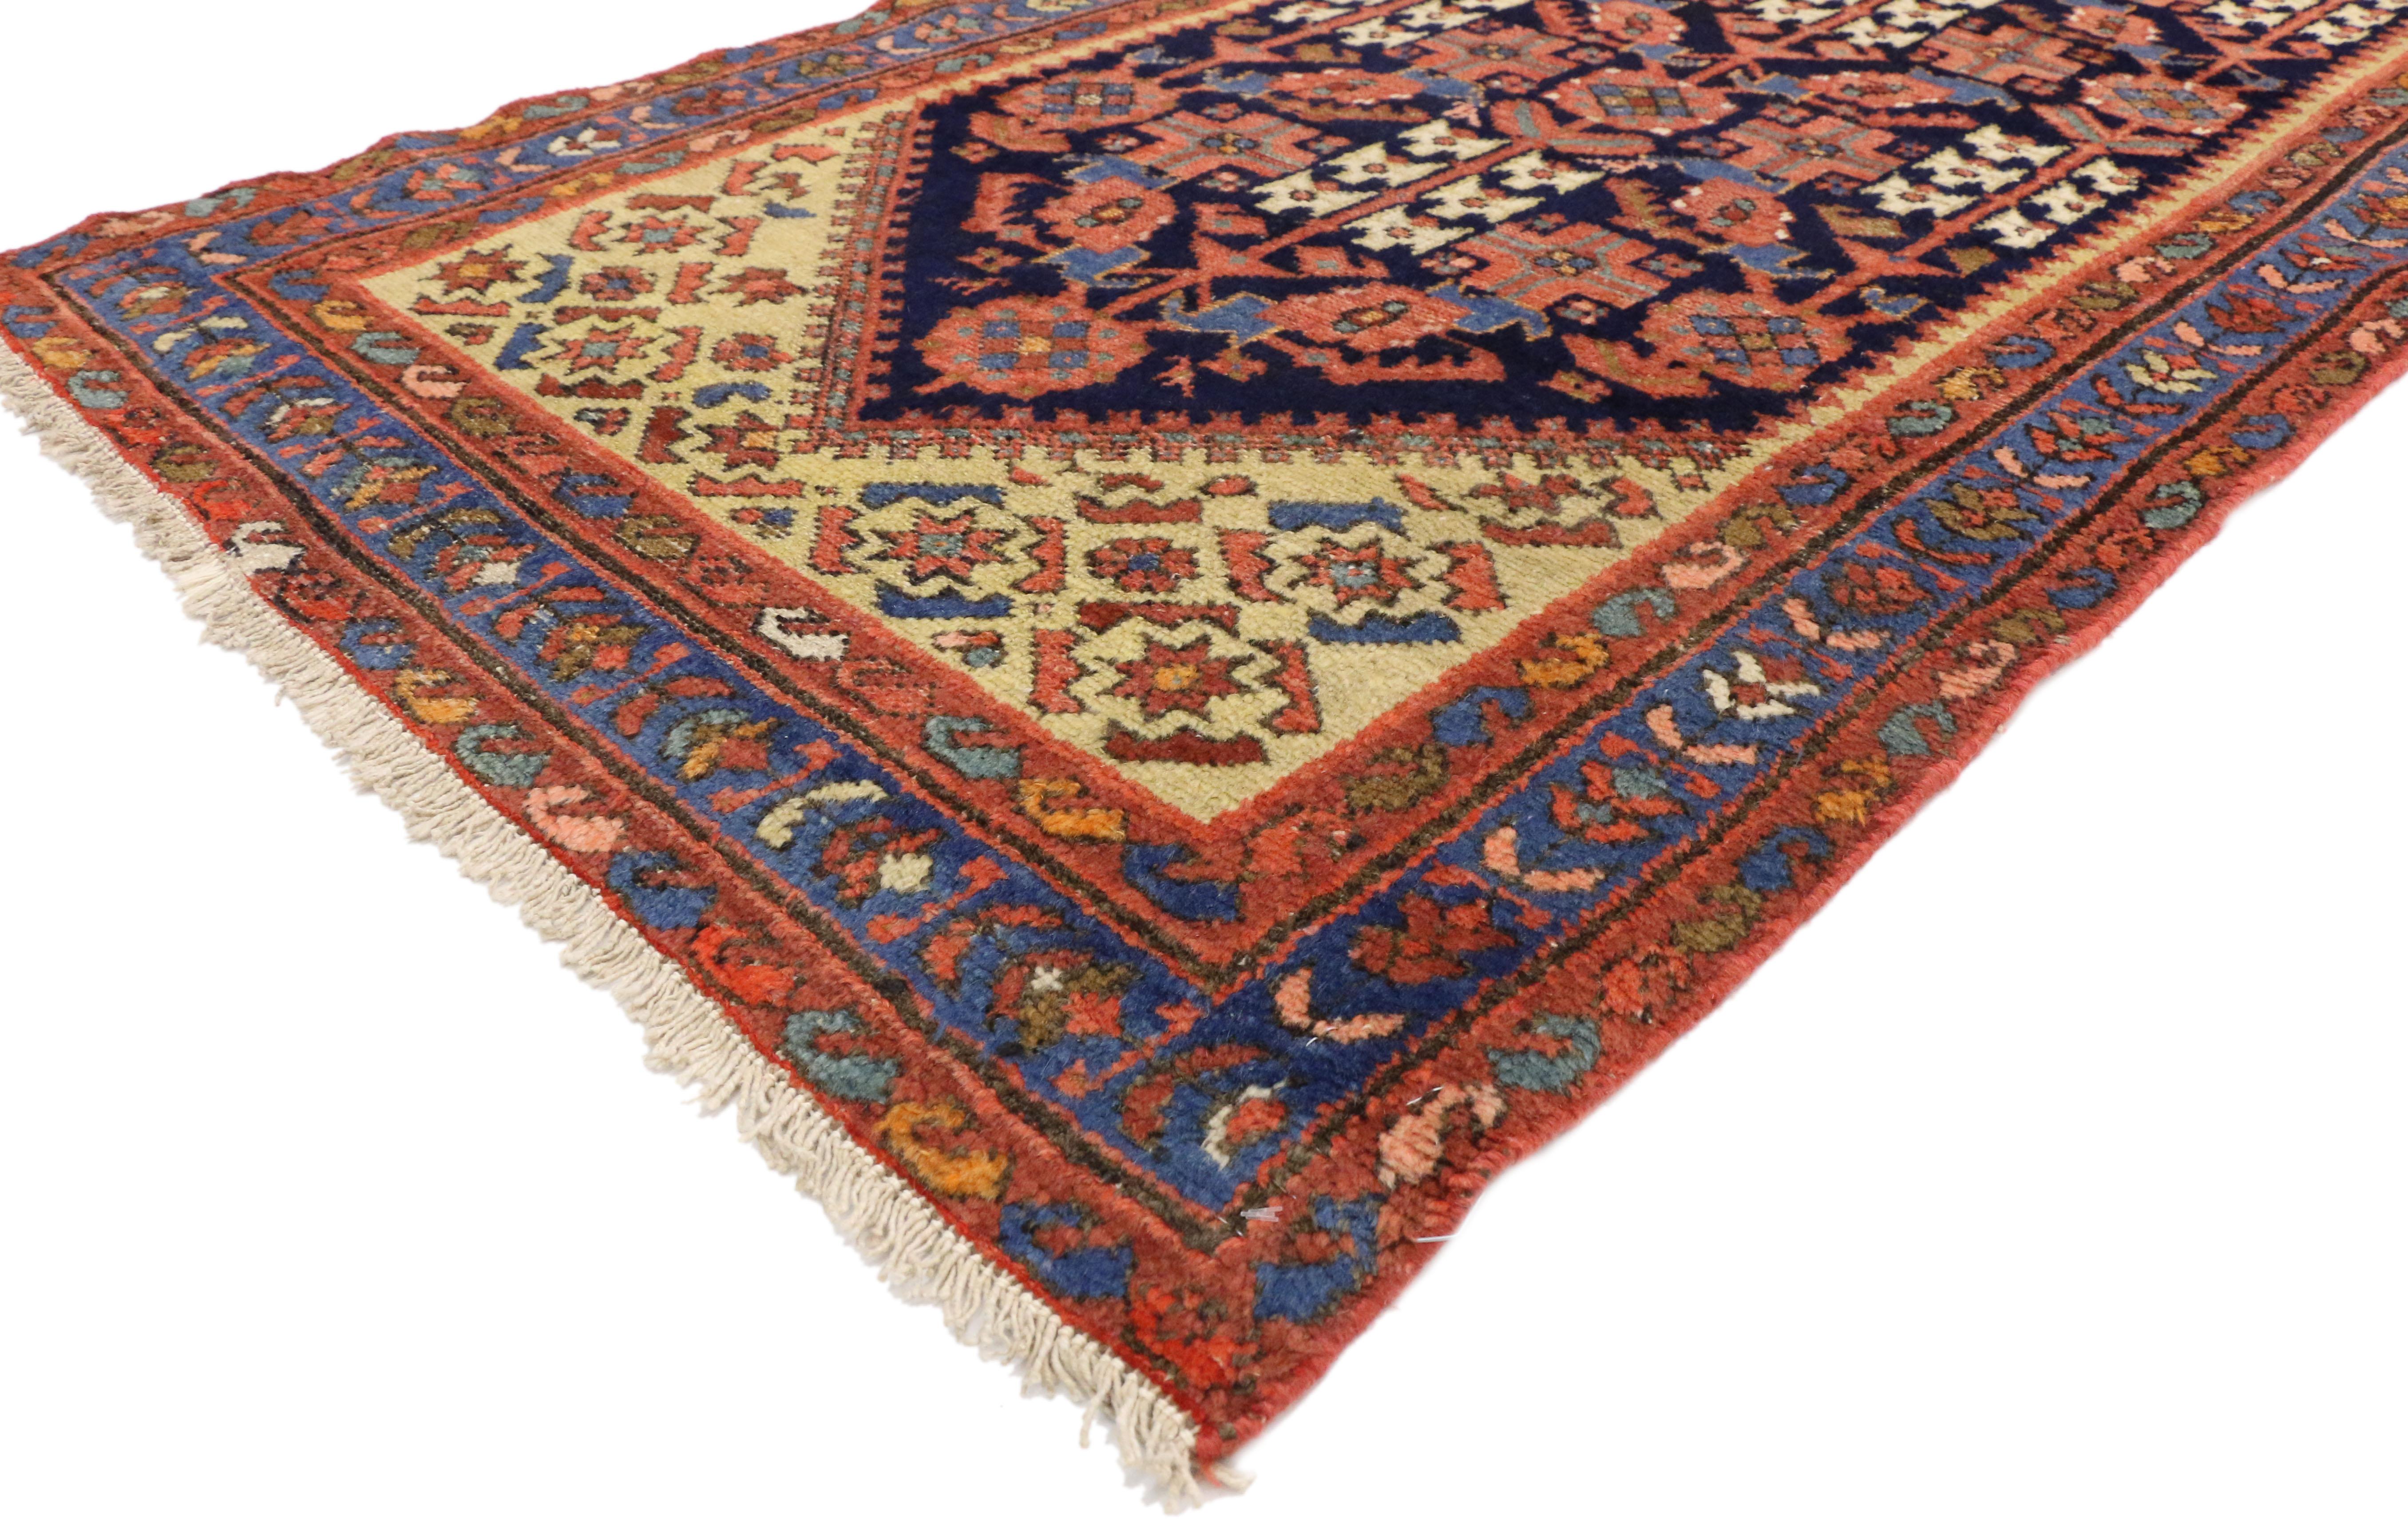 75339 Antique Persian Malayer Runner 03'03 X 07'11.
With ornate details and rustic sensibility, this hand knotted wool antique Persian Malayer runner will take on a curated lived-in look that feels timeless while imparting a sense of warmth and